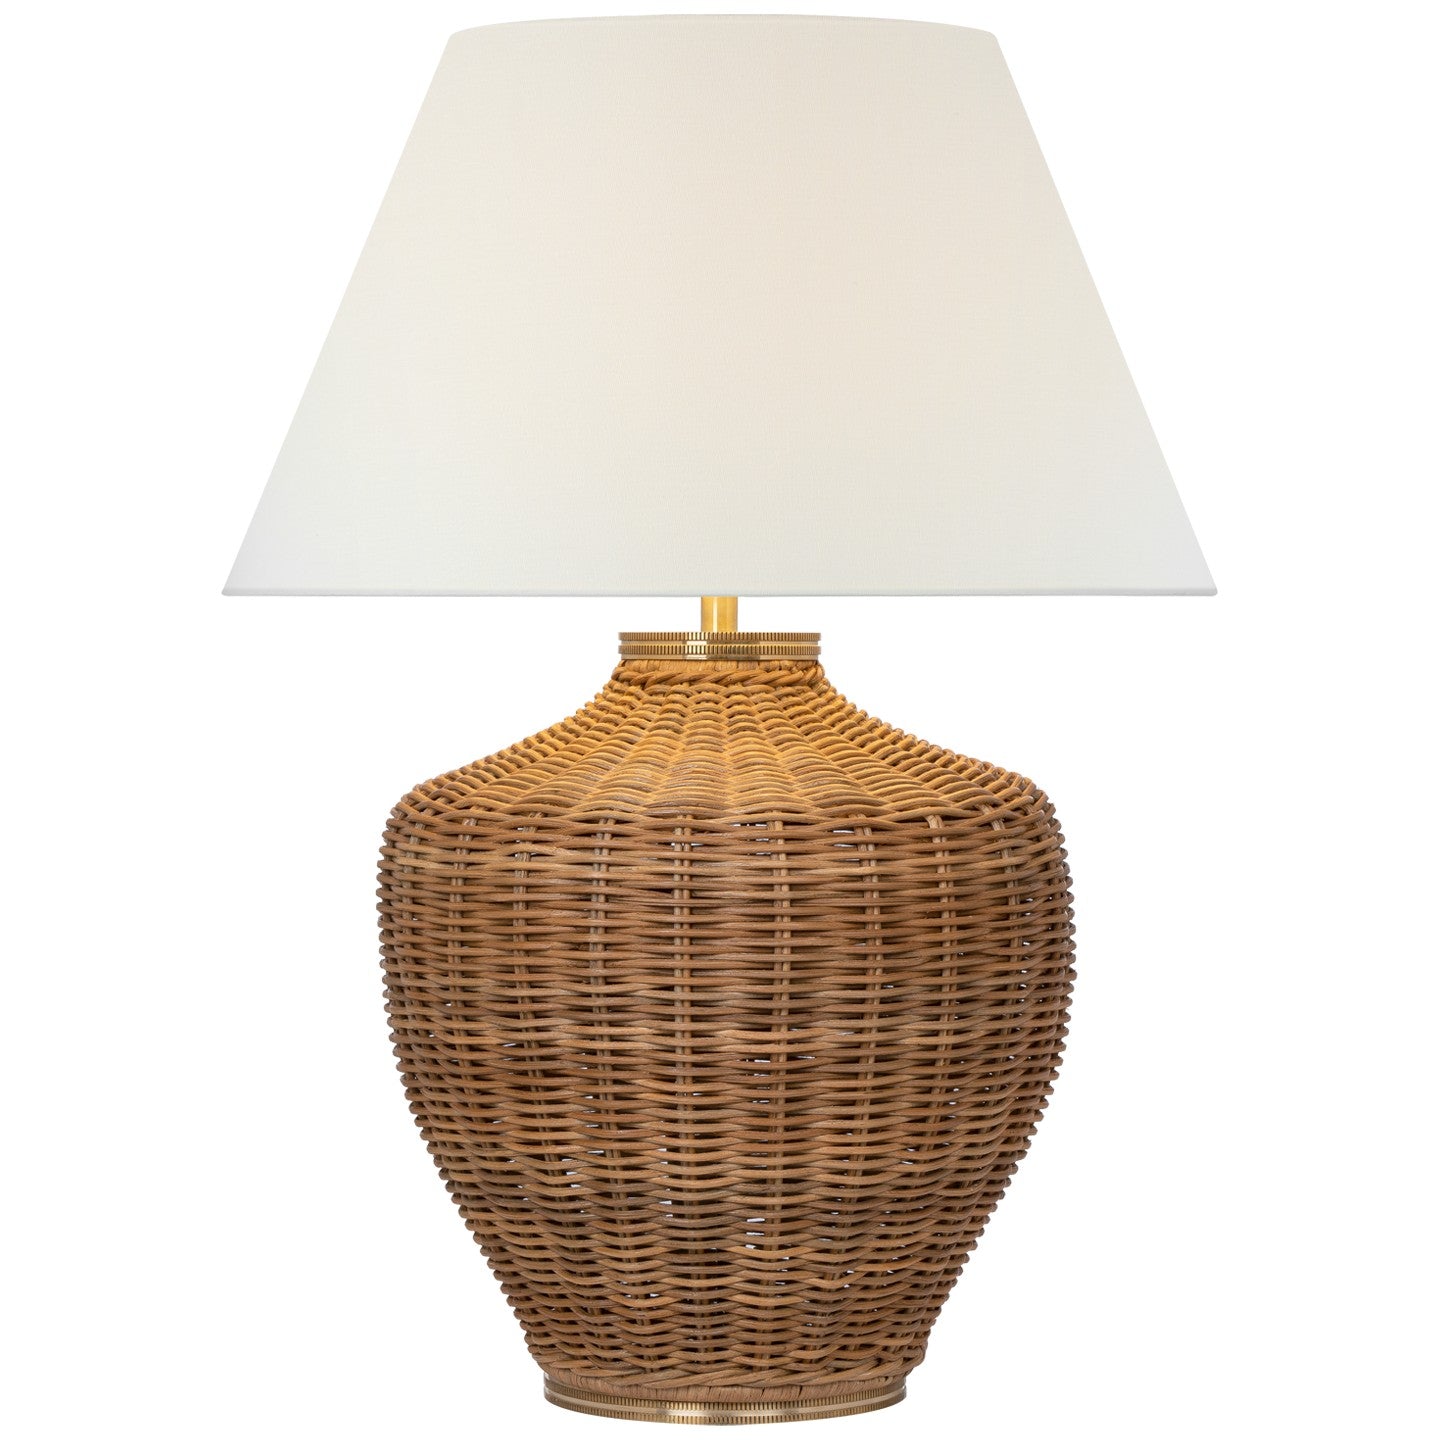 Visual Comfort Signature - MF 3012NTW-L - LED Table Lamp - Evie - Natural Wicker